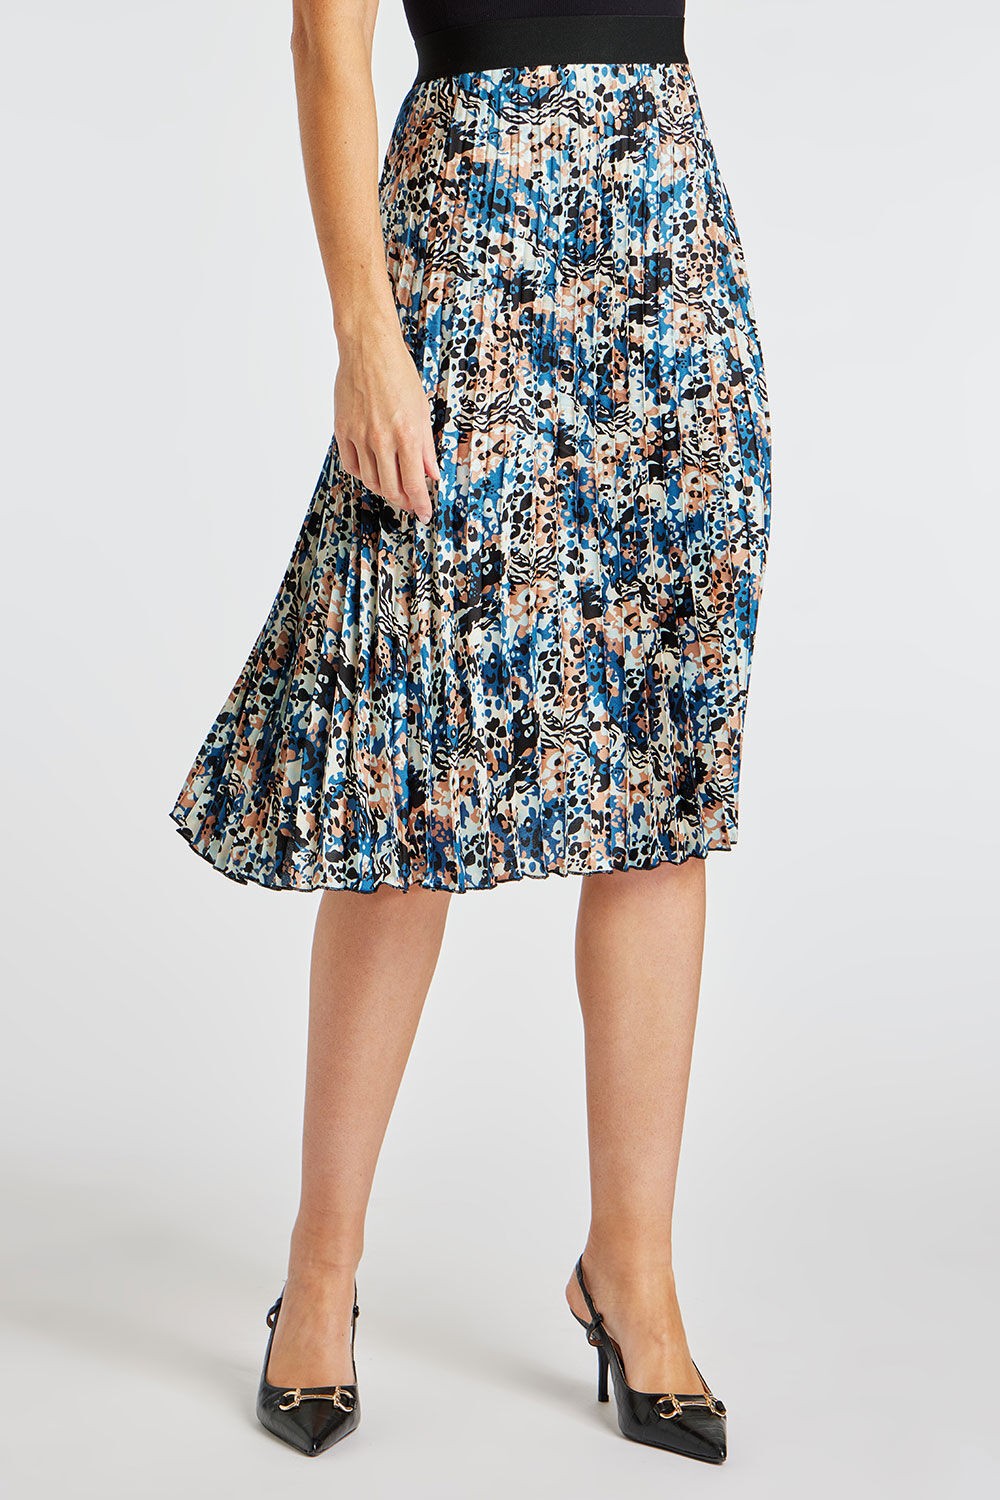 Bonmarche Brown Animal Patchwork Print Elasticated Pleated Skirt, Size: 28